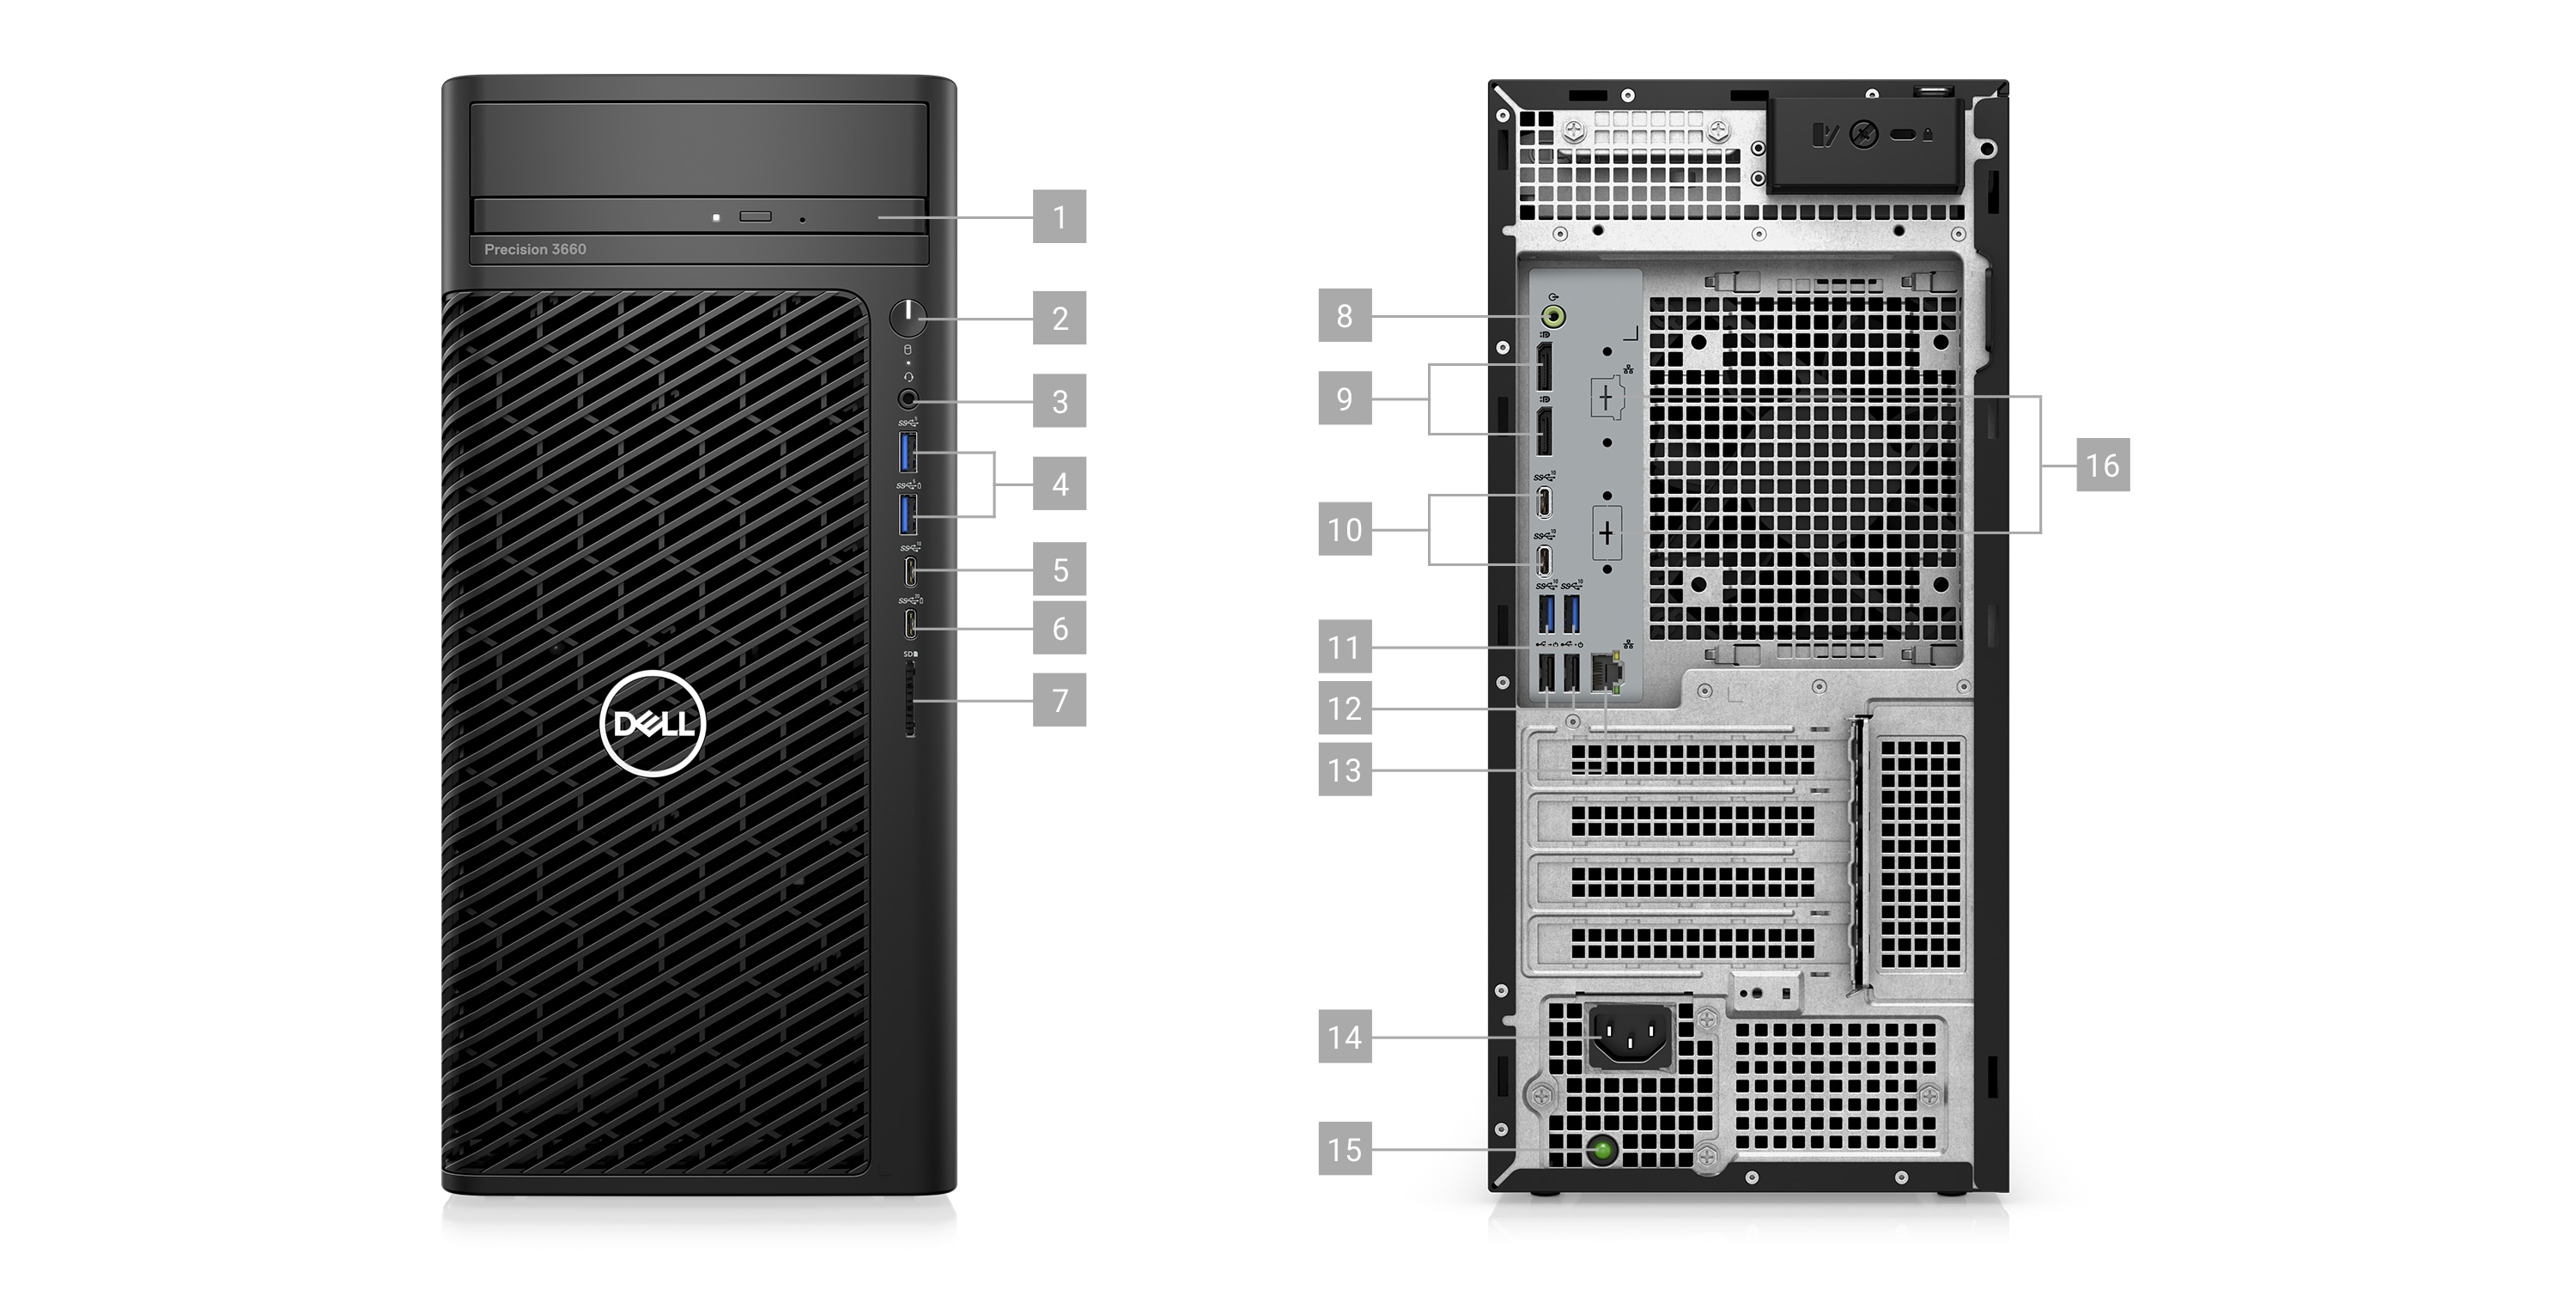 Picture of two Dell Precision 3660 Tower Workstations with numbers from 1 to 16 signaling the product ports & slots.